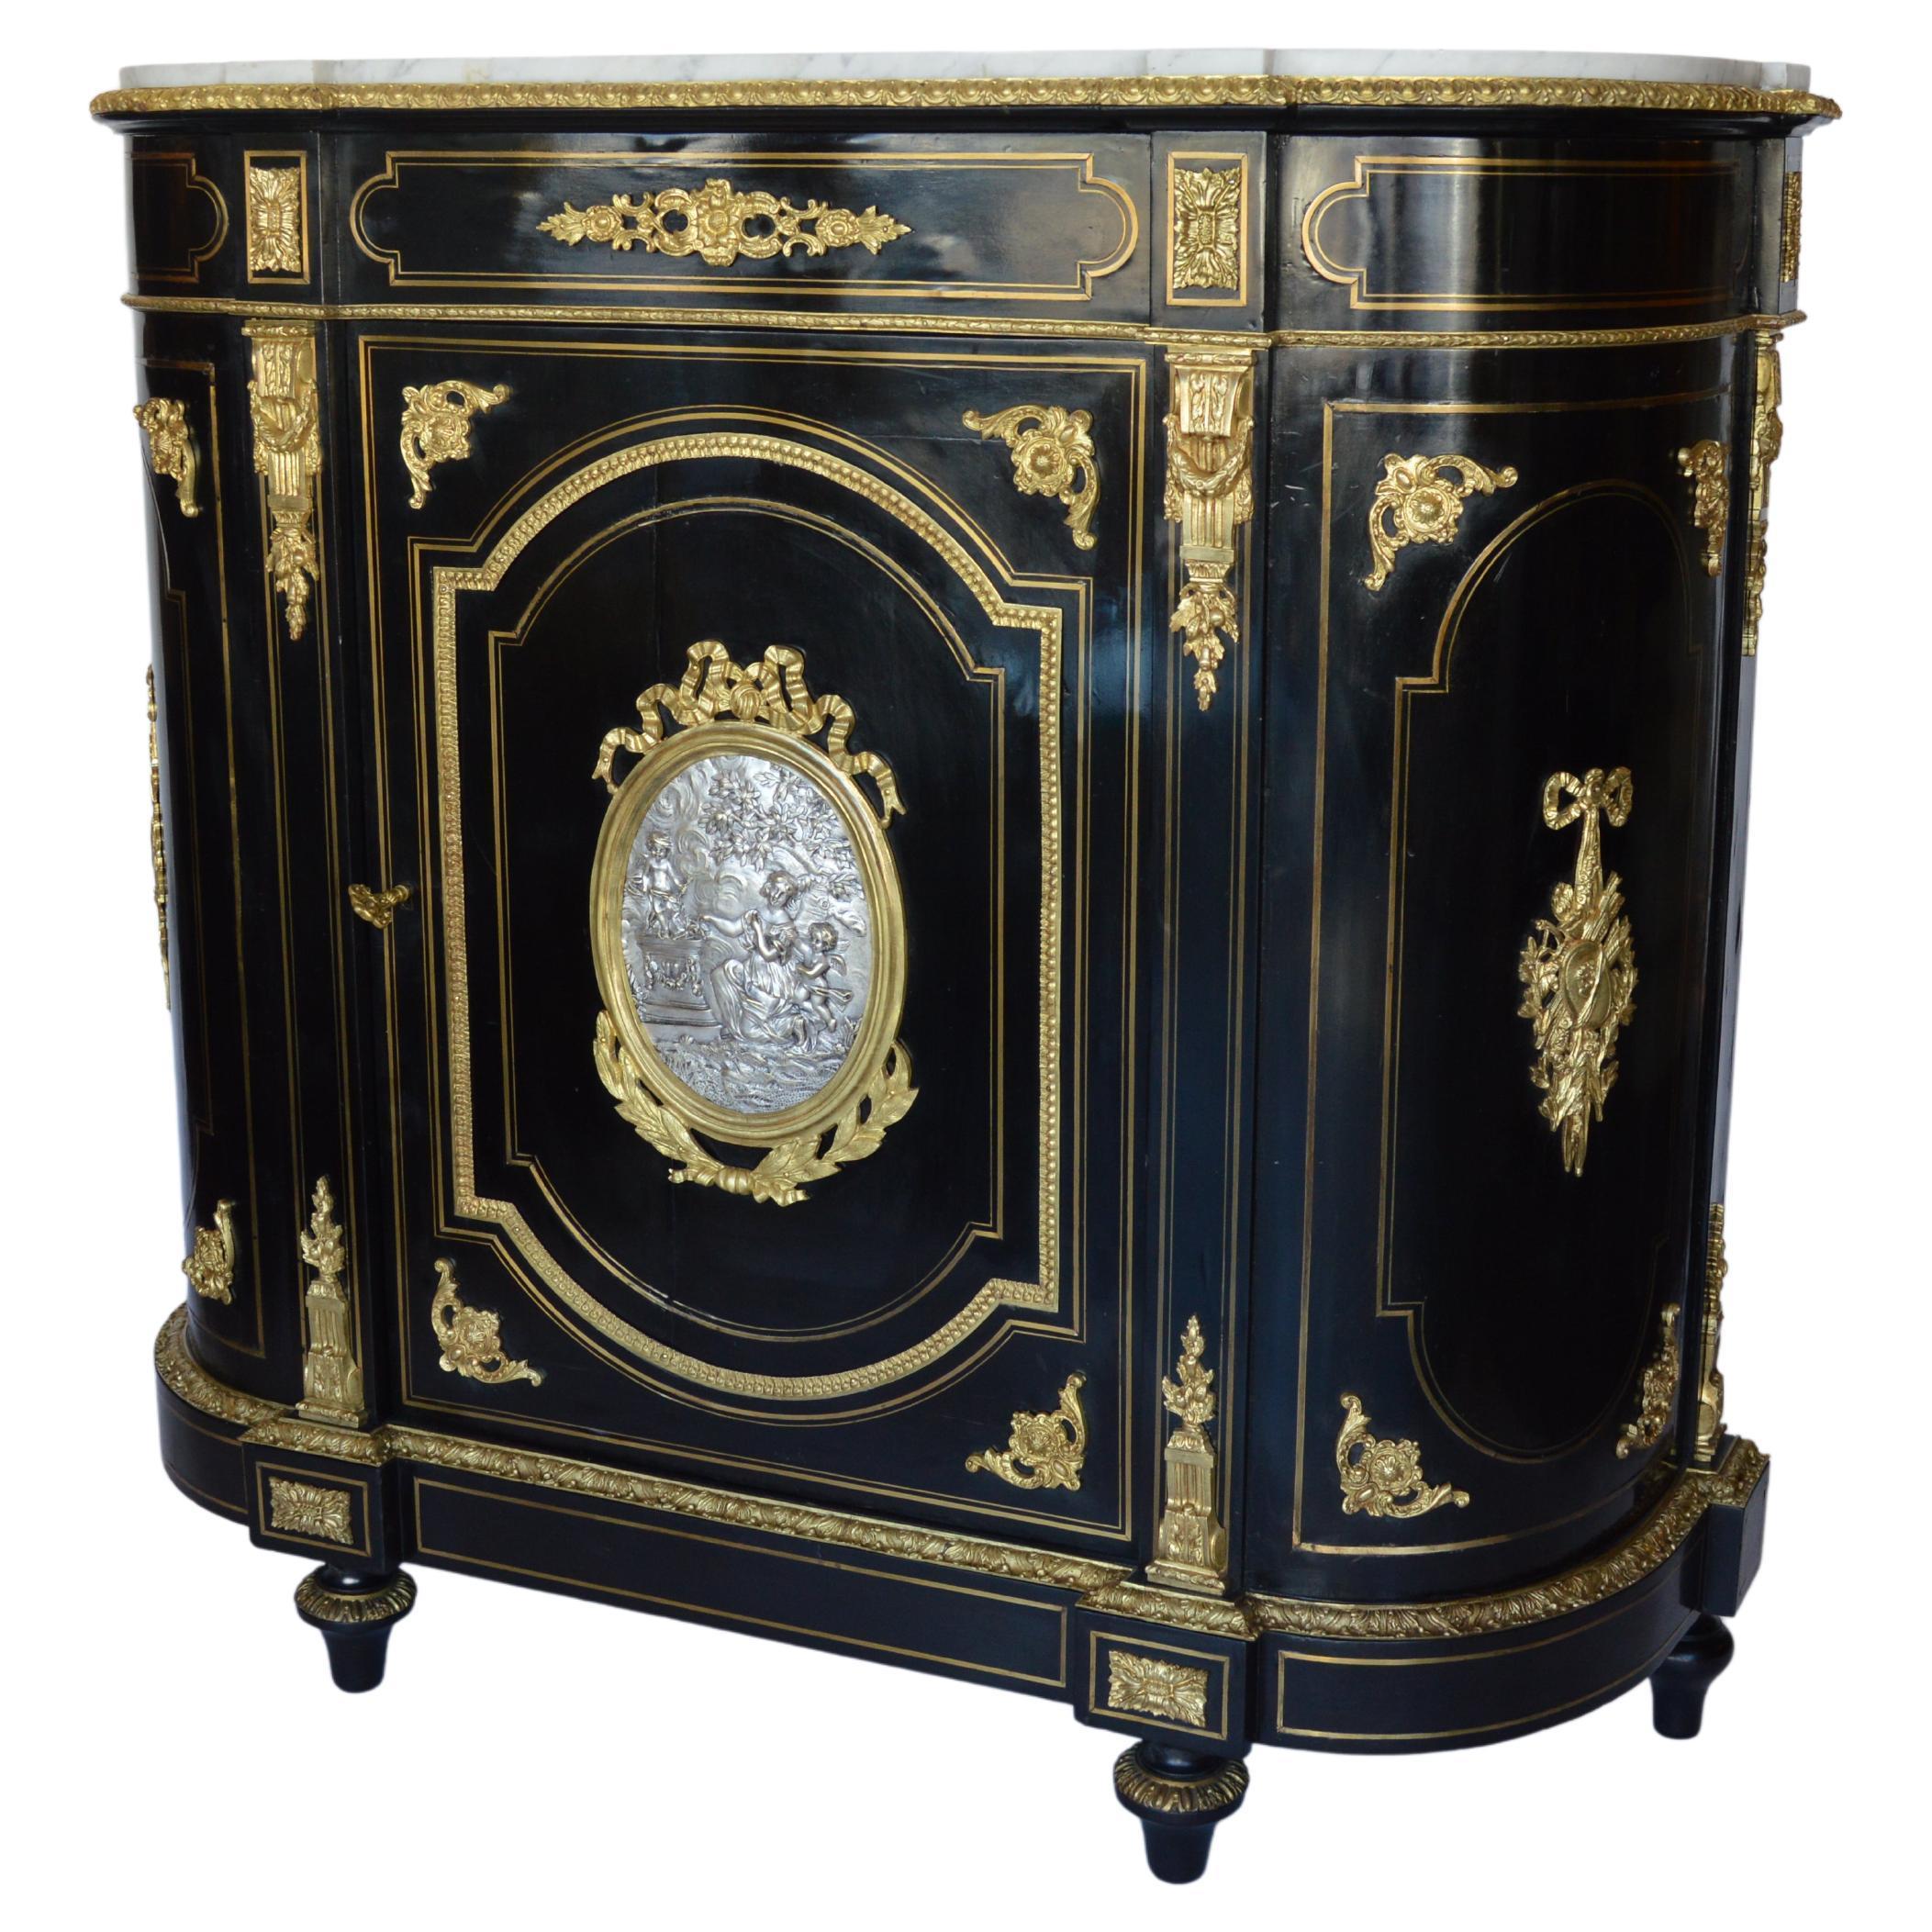 French Napoleon III Sideboard Cabinet in Blackened Wood Decorated with Gilded and Chiseled Bronzes with Silver Medallion and Bronze Plated Details. This Work is Representative of the Napoleon III Period in the 19th Century.